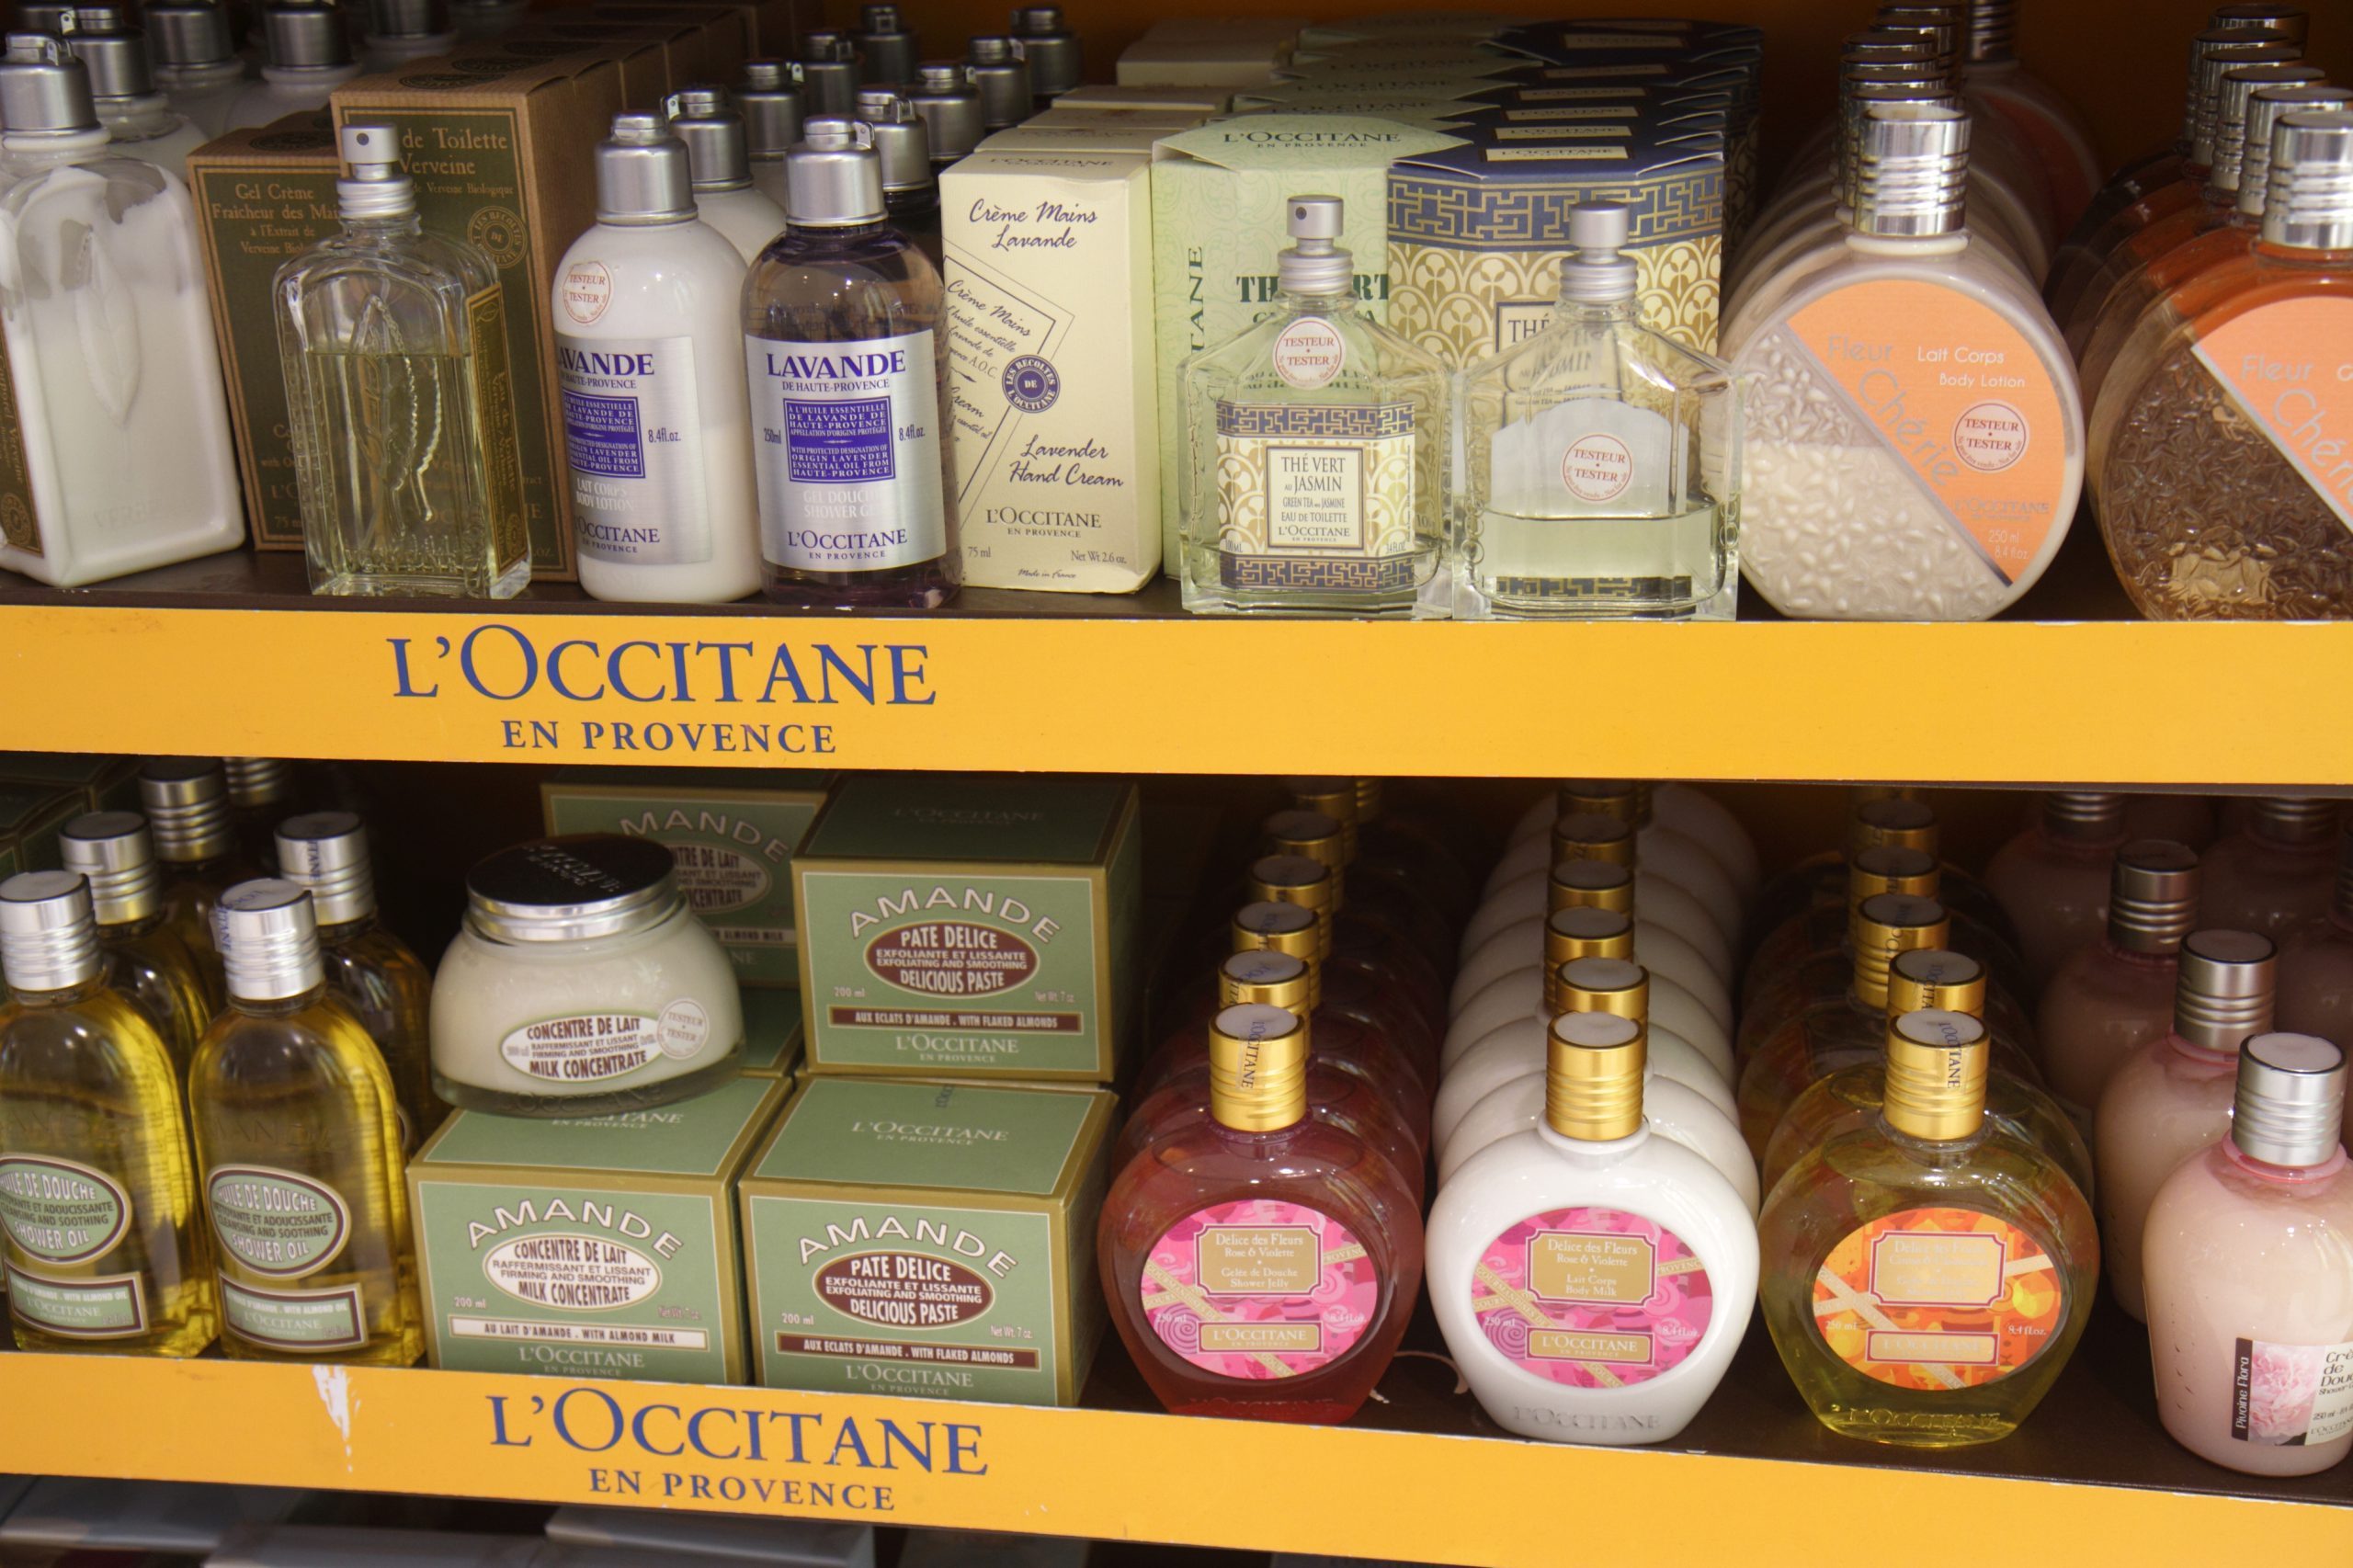 <p>Flying can be hard on your skin, so why not pick up some luxurious lotions while shopping at the duty-free store? Products from trusted skincare brands like L'Occitane may even be available in duty-free, allowing you to pick up travel or full-size versions (since you are already through security checkpoints) of your favorite:</p> <ul> <li class="">Face scrubs</li> <li class="">Body lotions</li> <li class="">Anti-aging serums</li> <li class="">Shower oils</li> </ul> <p>Duty-free shops are still an option, but find out the <a href="https://www.rd.com/list/things-you-wont-see-in-airports-anymore/">things you <em>won't </em>see in airports anymore.</a></p> <p><strong>Sources:</strong></p> <ul> <li class=""><a href="https://www.fodors.com/news/author/alexis-kelly" rel="noopener noreferrer">Alexis Kelly</a>, editor, <em>Fodors Travel</em></li> <li class="">Paul Eisenberg, <a href="https://www.travelingmom.com/travelingdad/" rel="noopener noreferrer">Traveling Dad</a></li> <li class=""><a href="https://twitter.com/dutyfreeaddict?lang=en" rel="noopener noreferrer">Duty Free Addict</a></li> <li class=""><a href="https://www.travelandleisure.com/author/maya-kachroo-levine" rel="noopener noreferrer">Maya Kachroo-Levine</a>, writer, <em>Travel & Leisure </em></li> <li class="">Nadine Heubel, <a href="https://www.dfnionline.com/comment-insight/features/interview-heinemann-americas-ceo-nadine-heubel-01-04-2020/" rel="noopener noreferrer">CEO of Heinemann Americas</a></li> <li class="">Vera Holyrod, writer, <a href="https://passportsandspice.com/author/vera/" rel="noopener noreferrer">Passports and Spice</a></li> </ul>